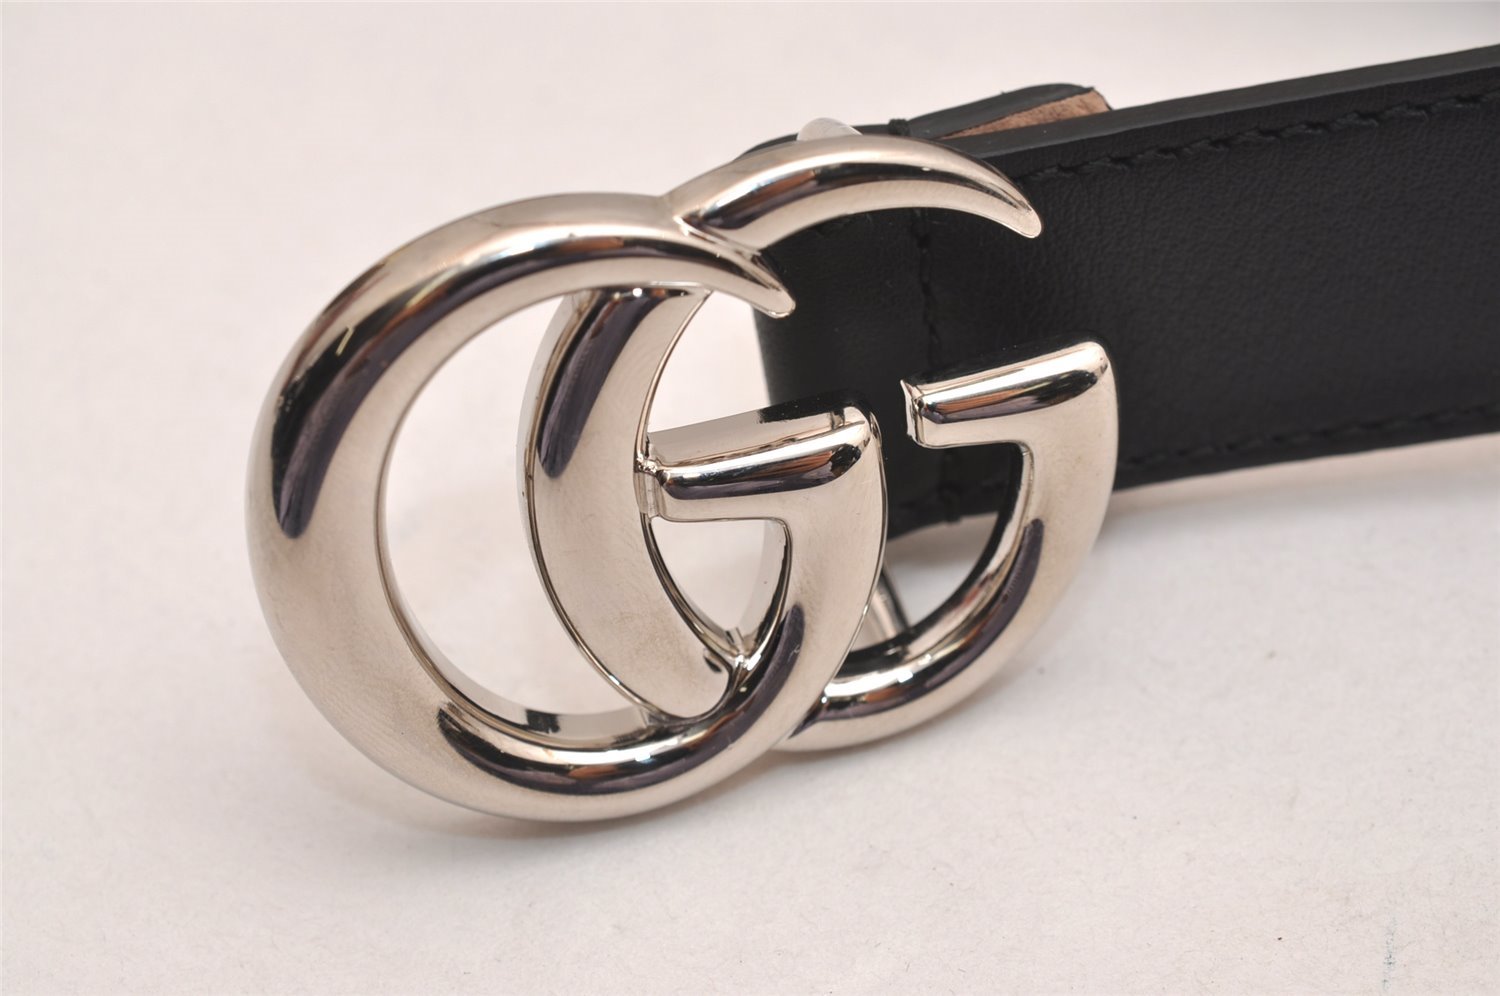 Authentic GUCCI Childrens GG Marmont Leather Belt Black 20.1-23.2